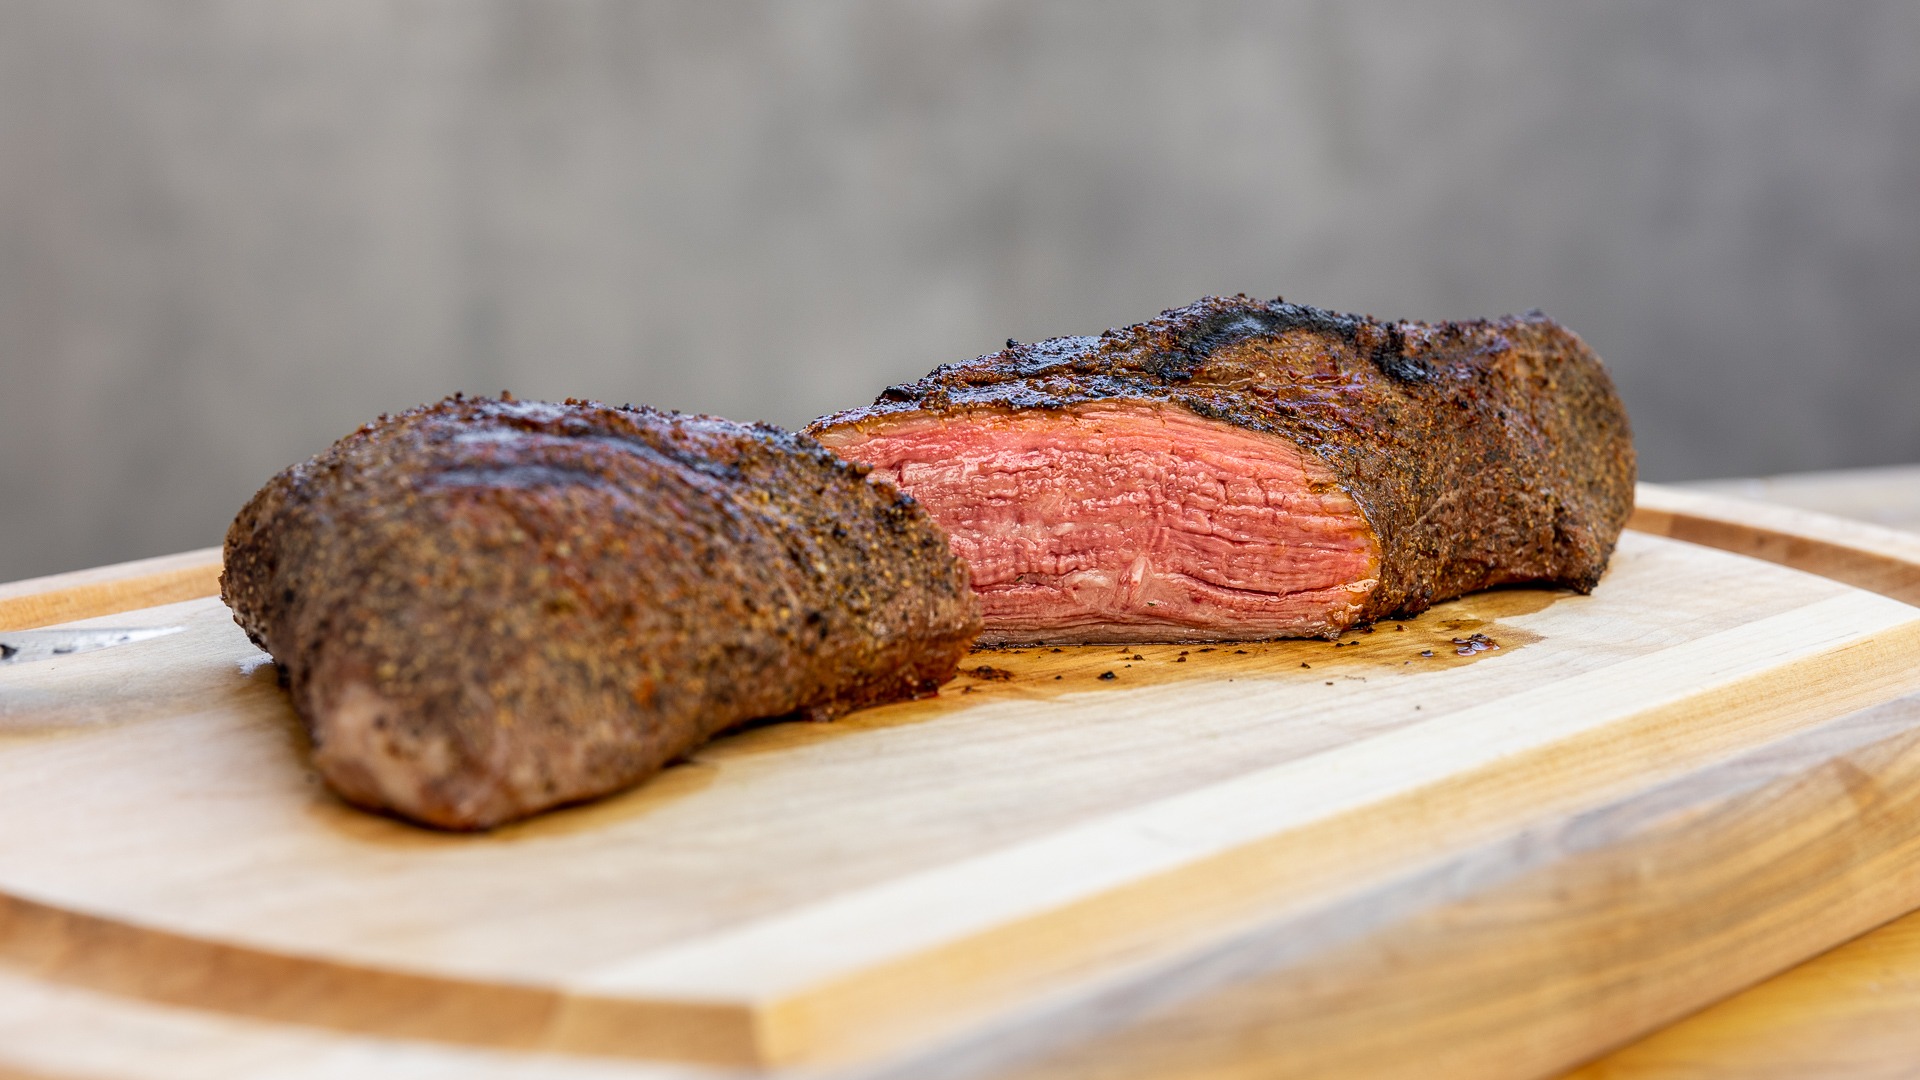 https://blog.thermoworks.com/wp-content/uploads/2021/10/Sous_Vide_Tri-Tip_Red_Yellow_ChefAlarm_Orange_ThermapenONE_Compressed-32.jpg